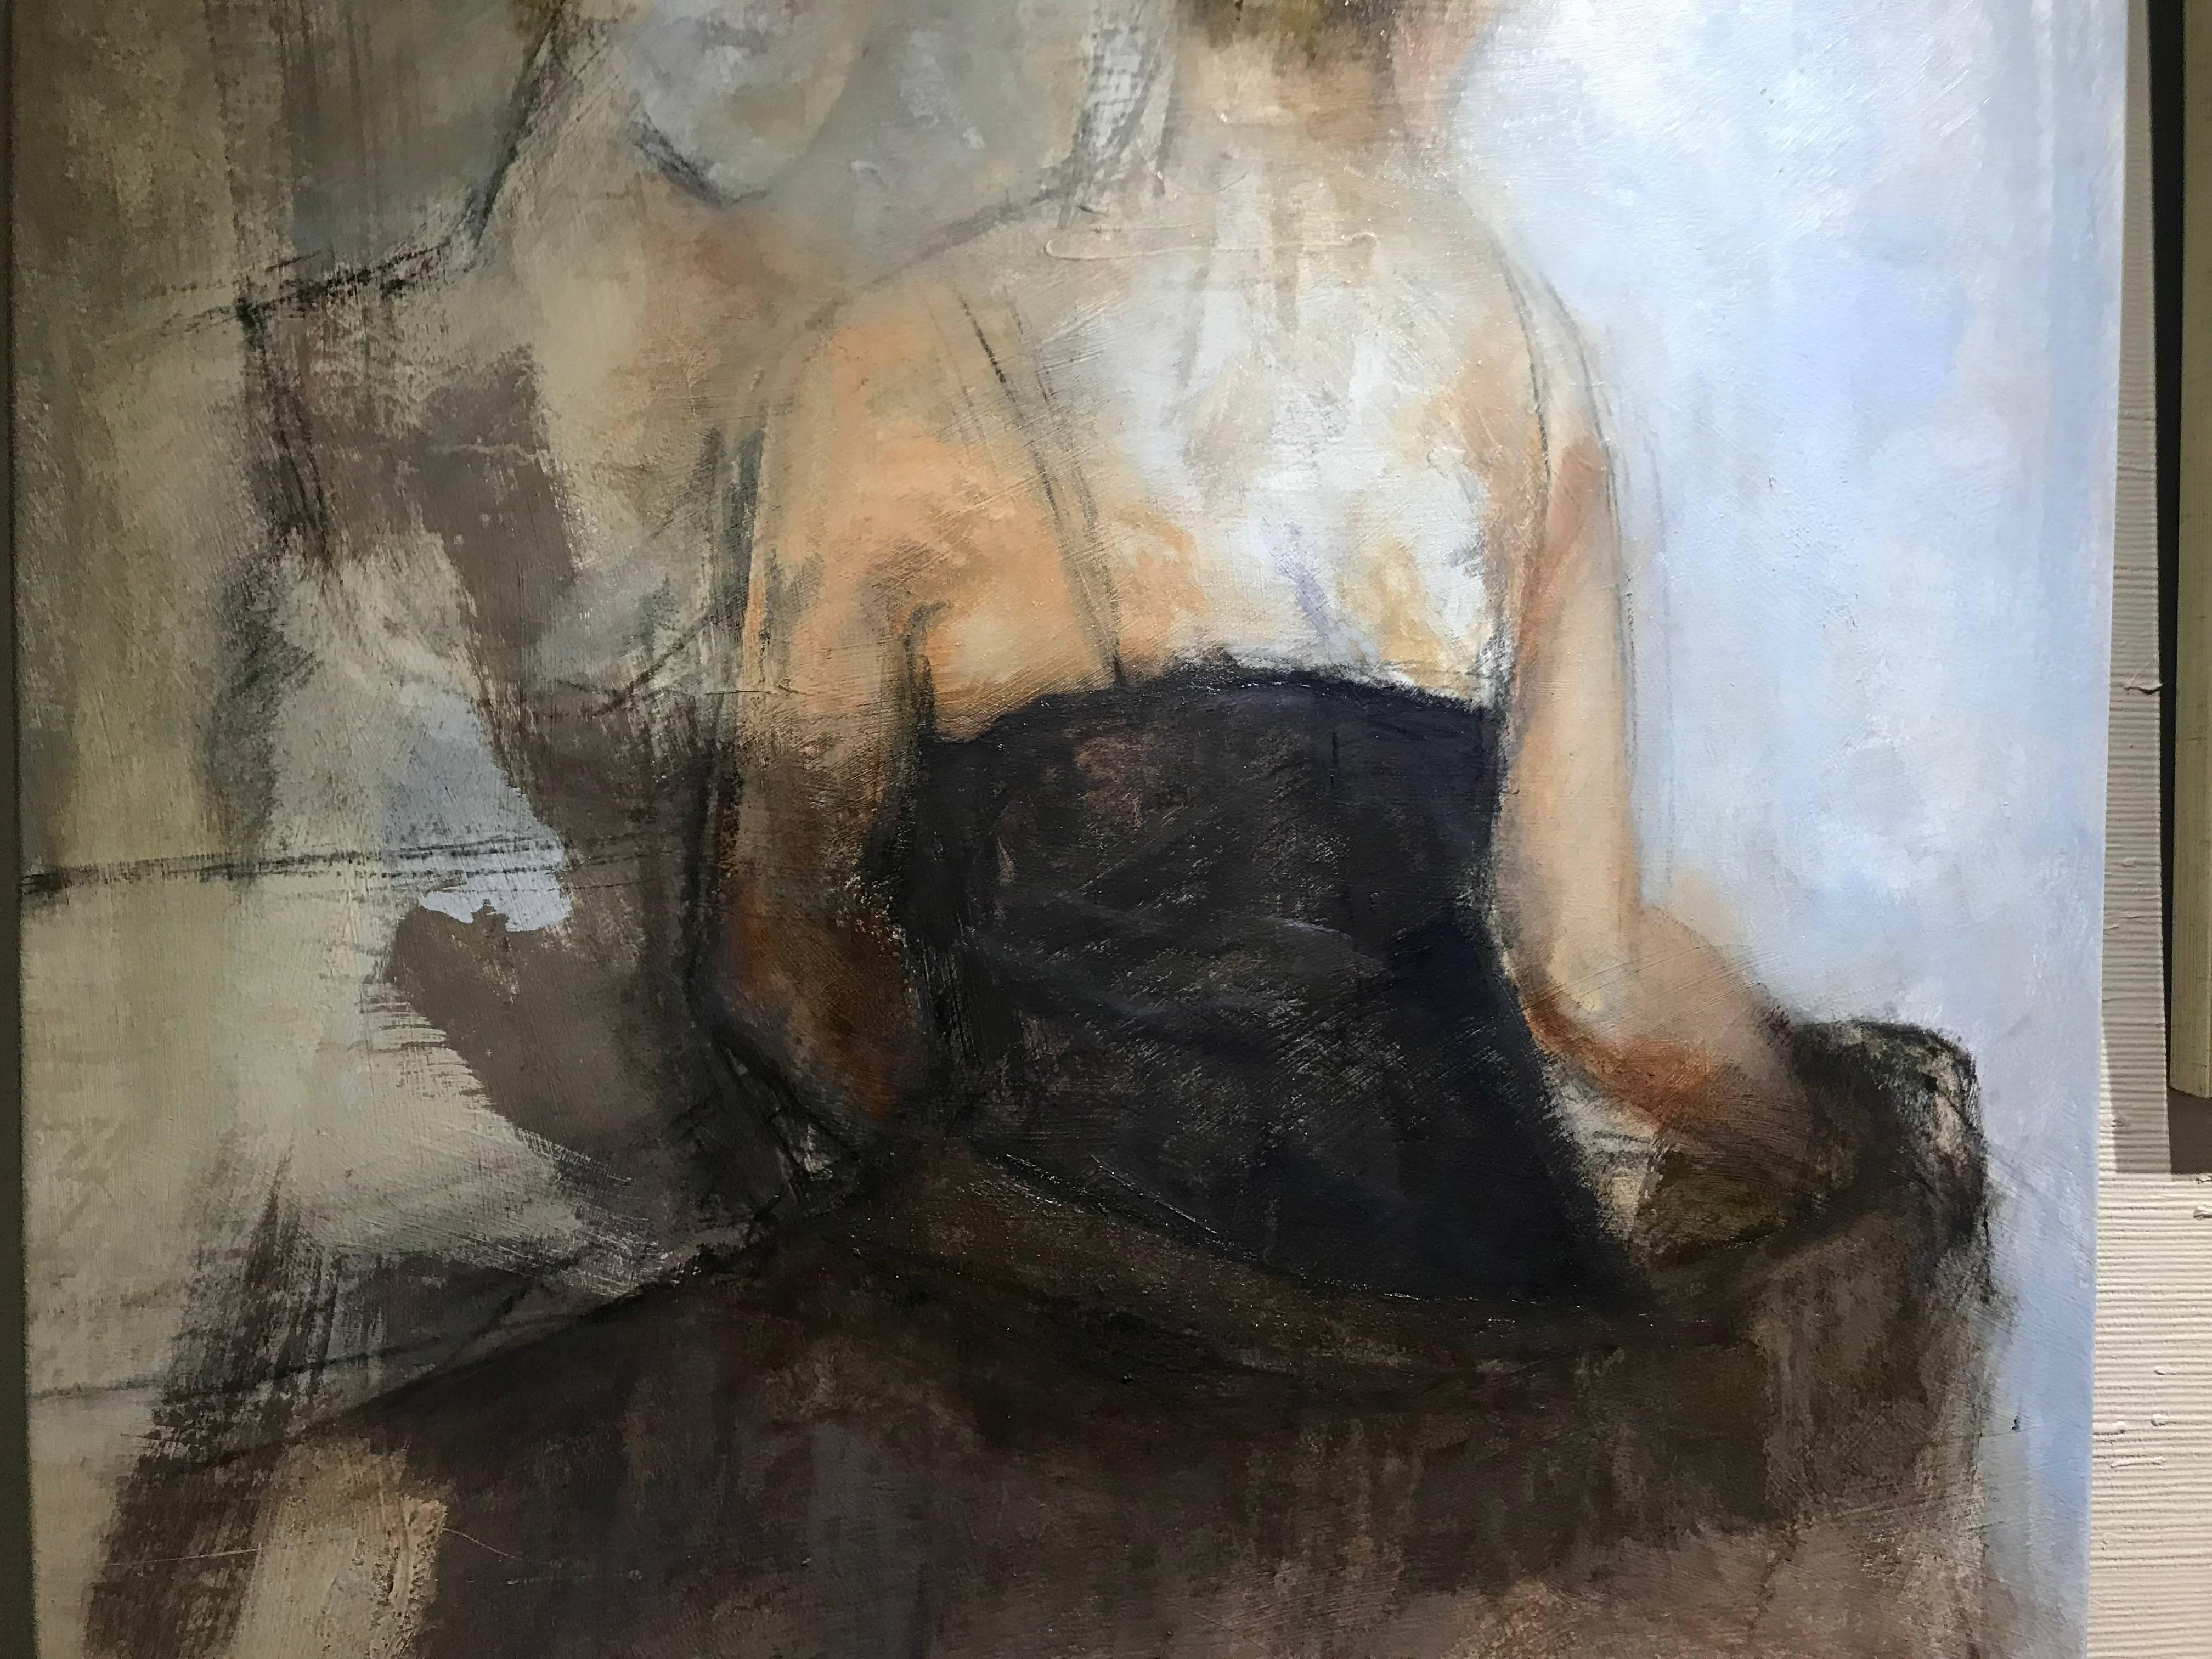 This gorgeous figurative painting by artist Sharon Hockfield depicts a woman in a chemise, facing the other direction, looking over her right shoulder.  To the left of her left shoulder, one sees a reflection of the figure in a mirror.  Sharon's